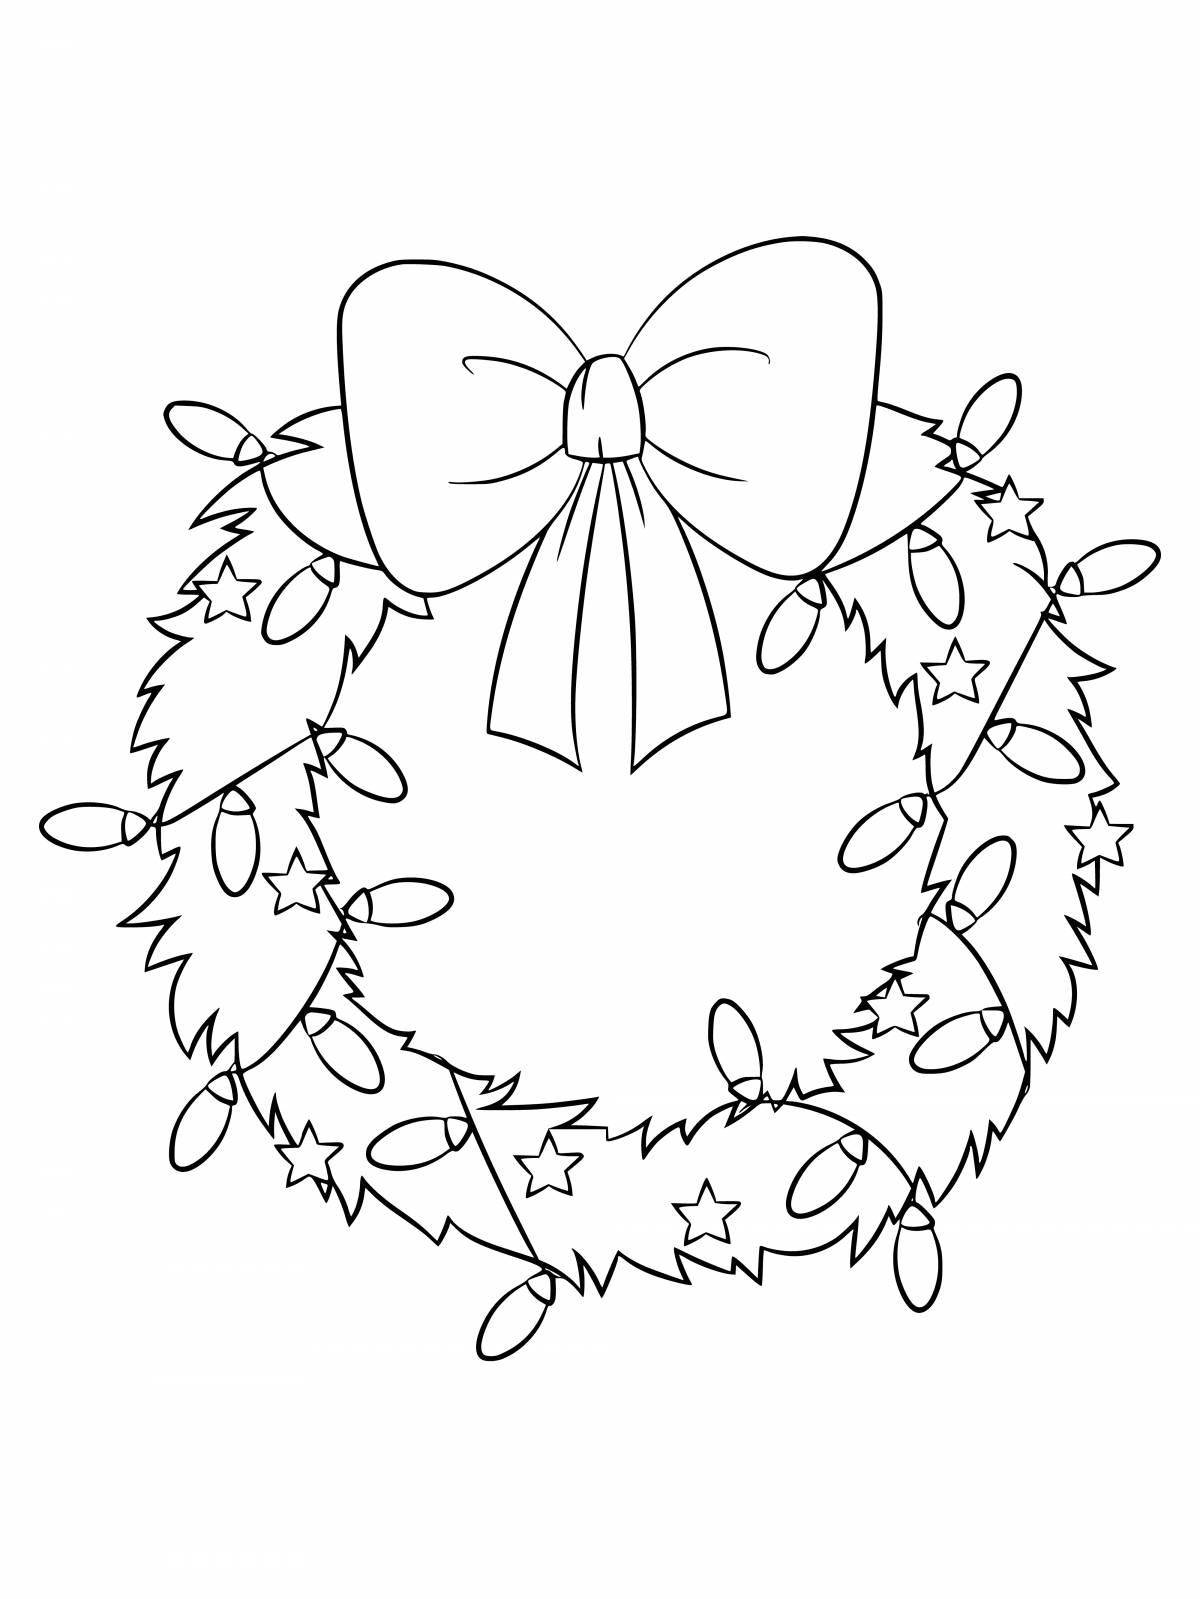 Coloring page graceful wreath